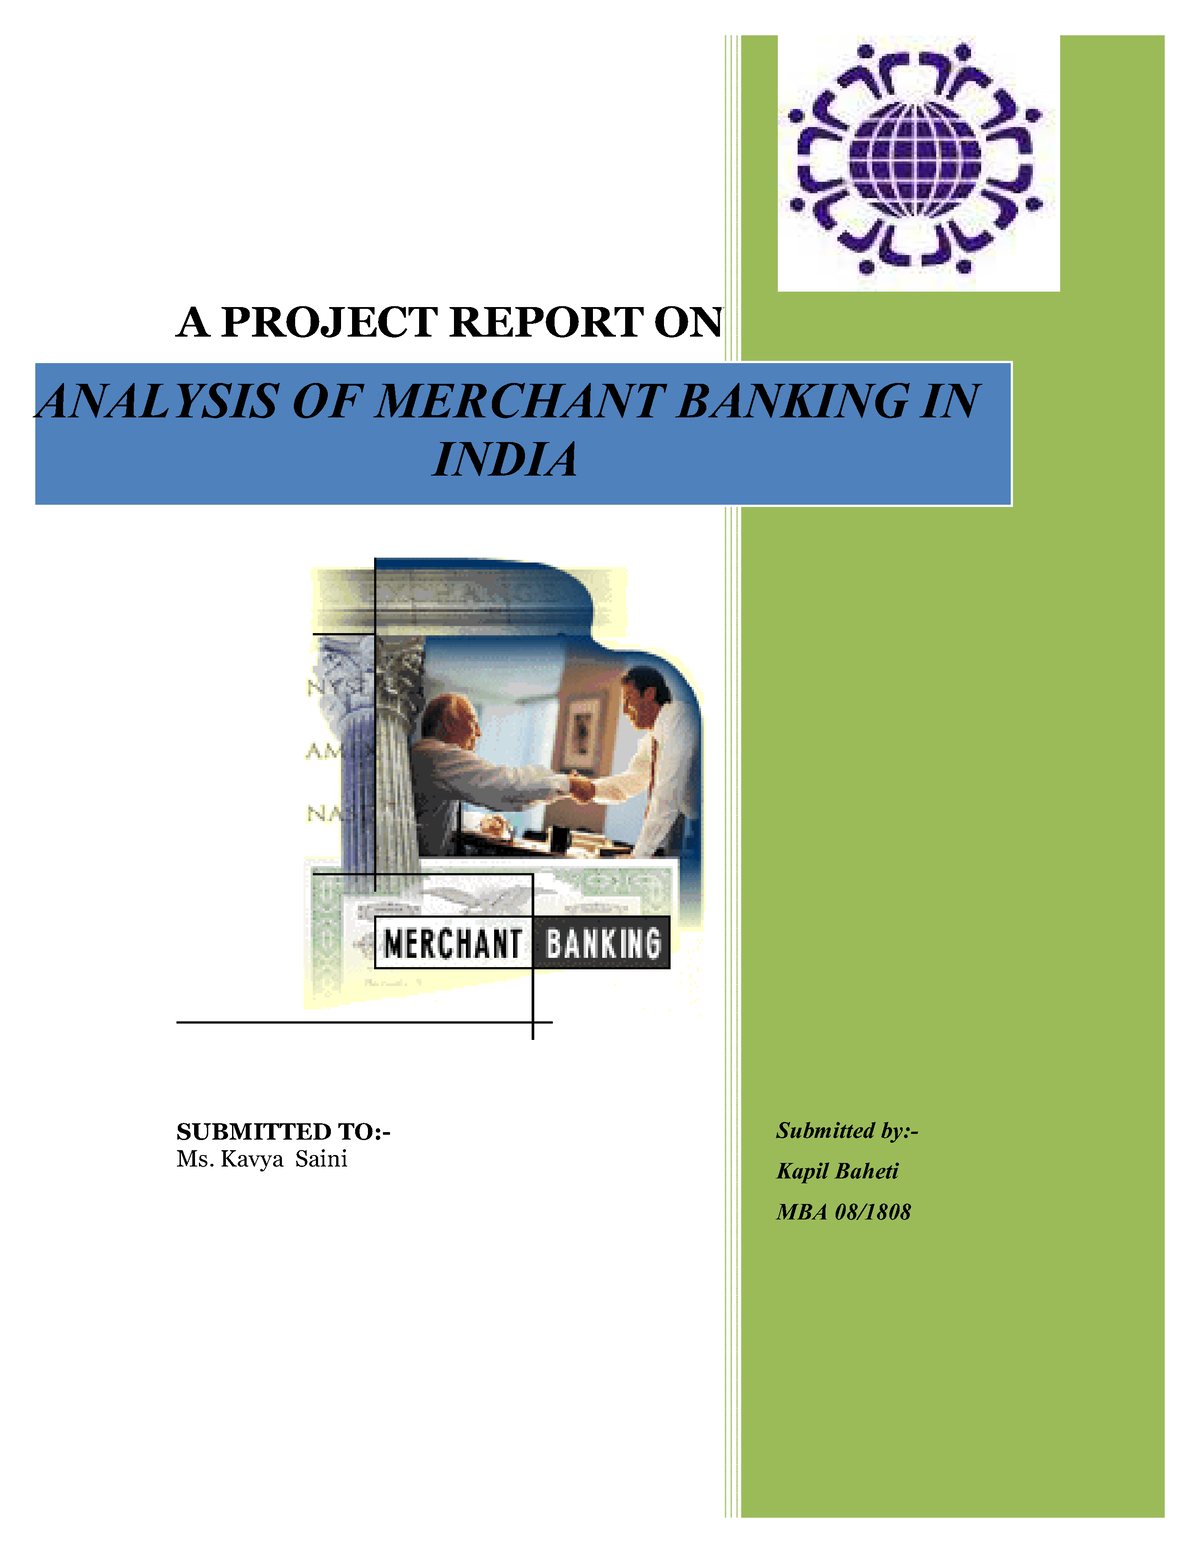 case study on merchant banking in india